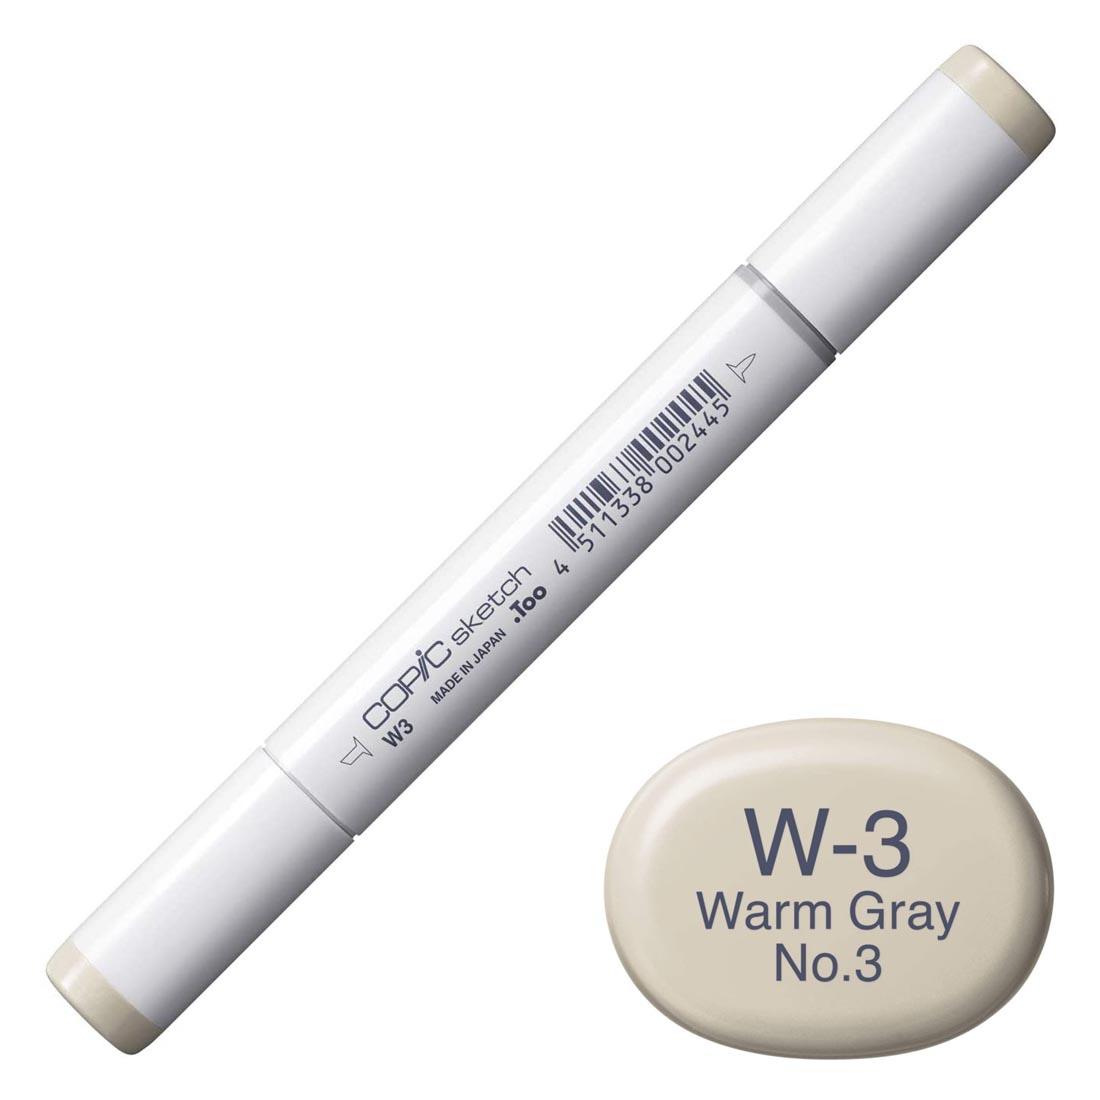 COPIC Sketch Marker with a color swatch and text of W-3 Warm Gray No.3